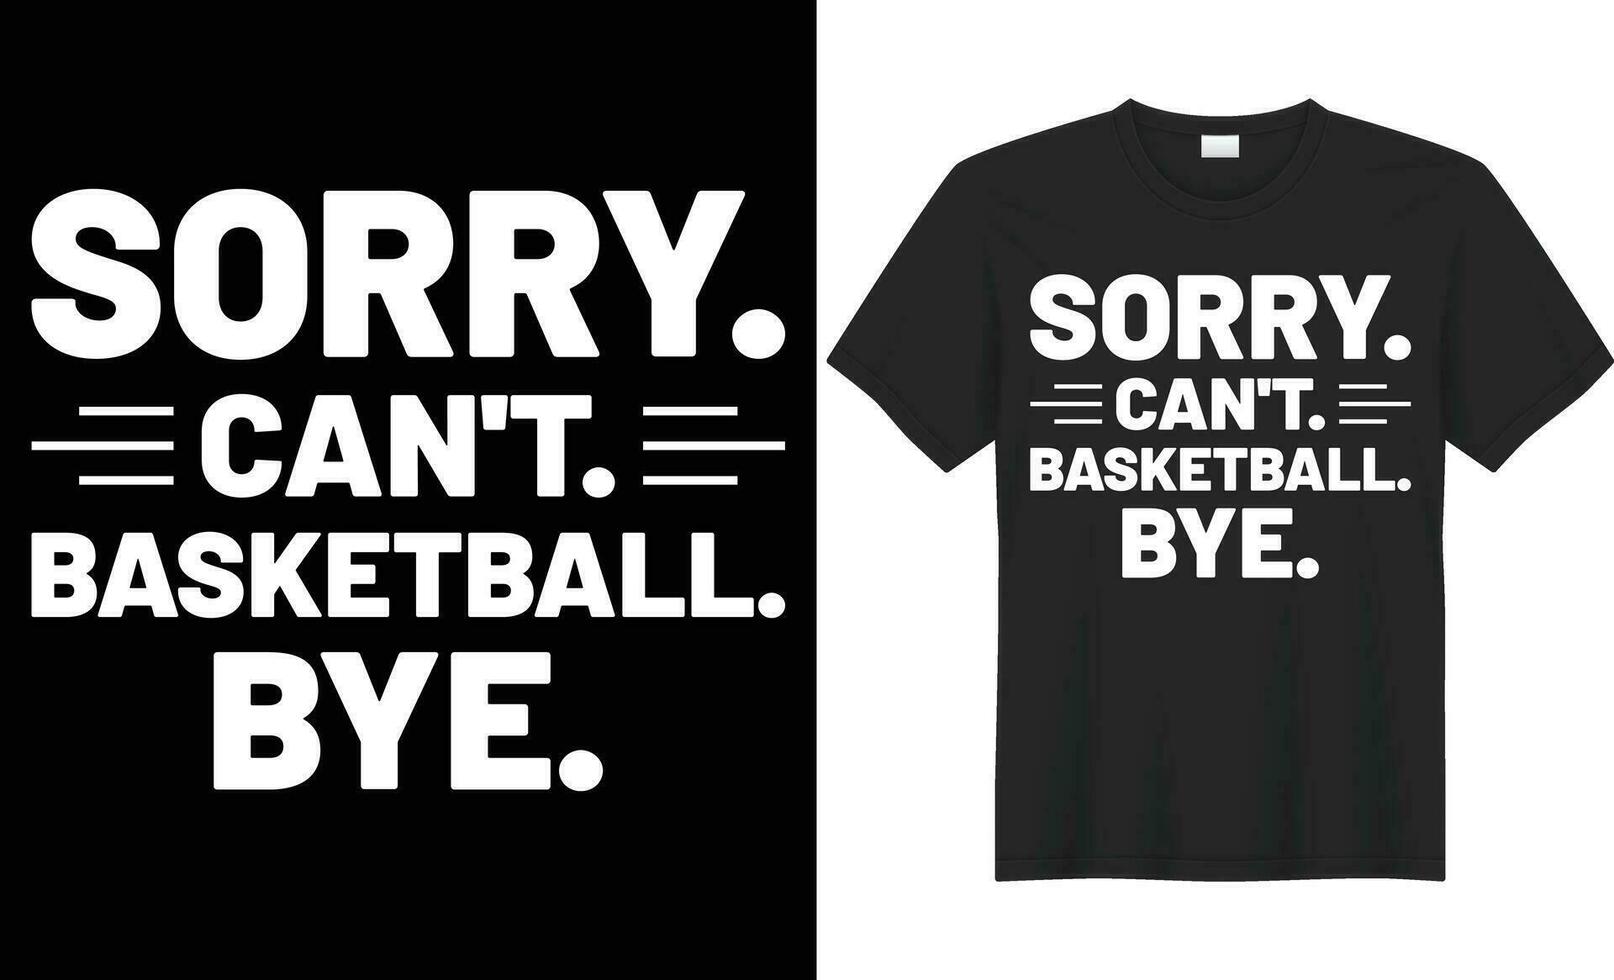 Sorry can't basketball bye typography vector t-shirt Design. Perfect for print items and bag, poster, sticker, mug, template. Handwritten vector illustration. Isolated on black background.